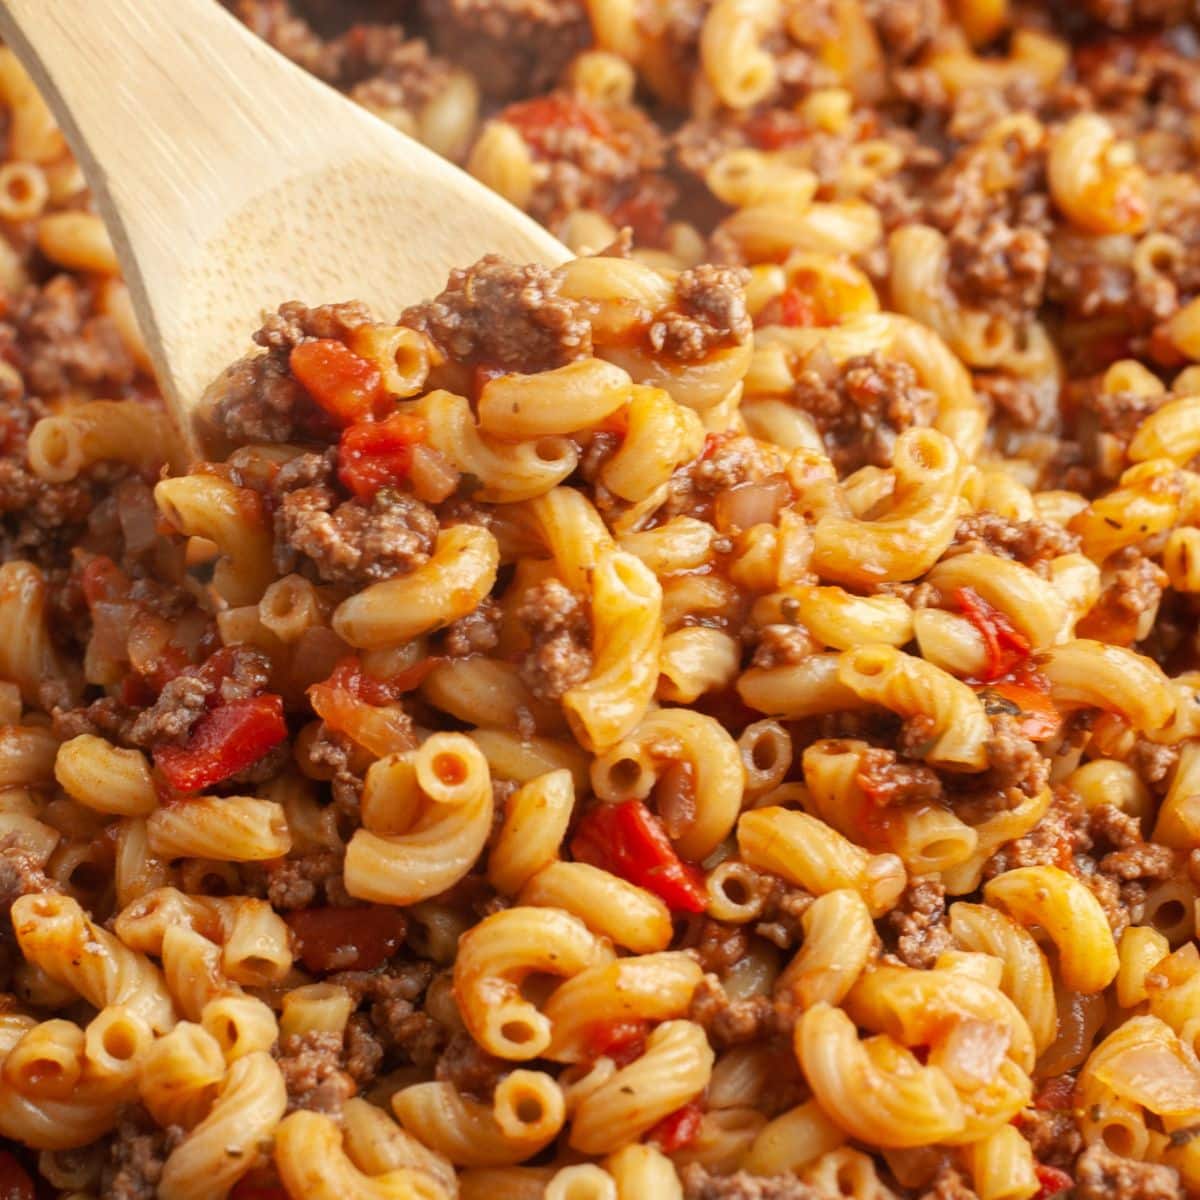 Wooden spoon with beefy elbow macaroni.